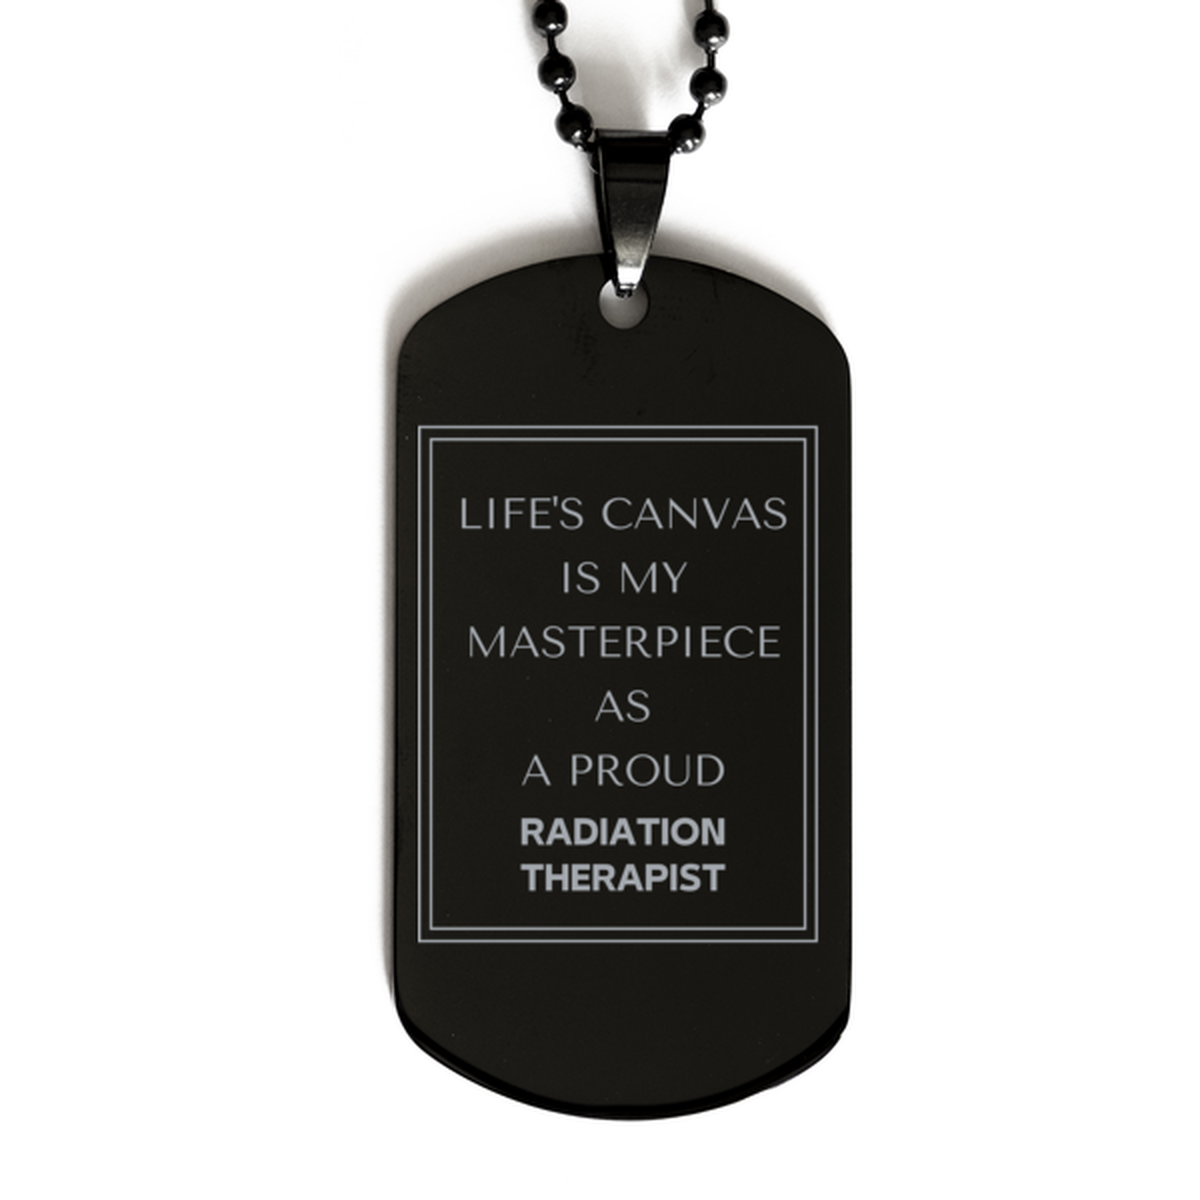 Proud Radiation Therapist Gifts, Life's canvas is my masterpiece, Epic Birthday Christmas Unique Black Dog Tag For Radiation Therapist, Coworkers, Men, Women, Friends